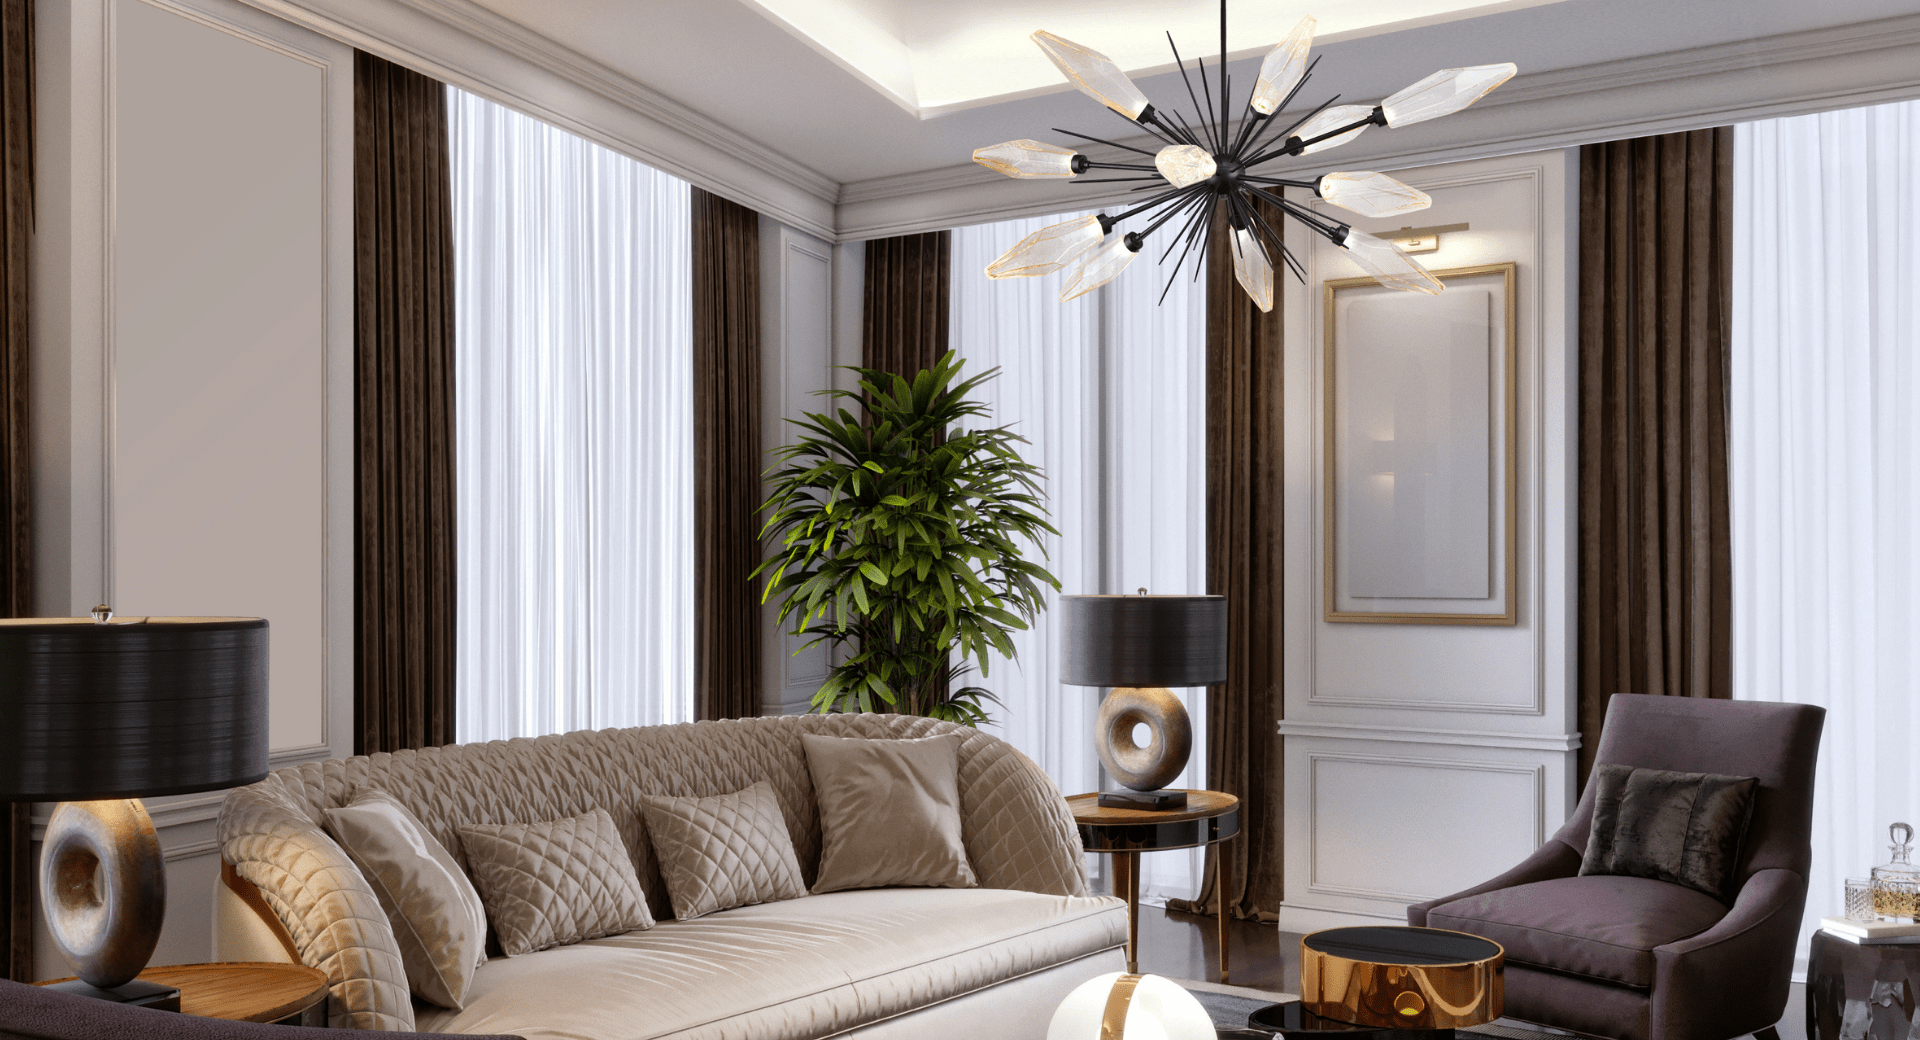 A Hammerton Studio Rock Crystal chandelier with matte black finish and rock crystal-shaped glass light shades in an elegant living room setting.